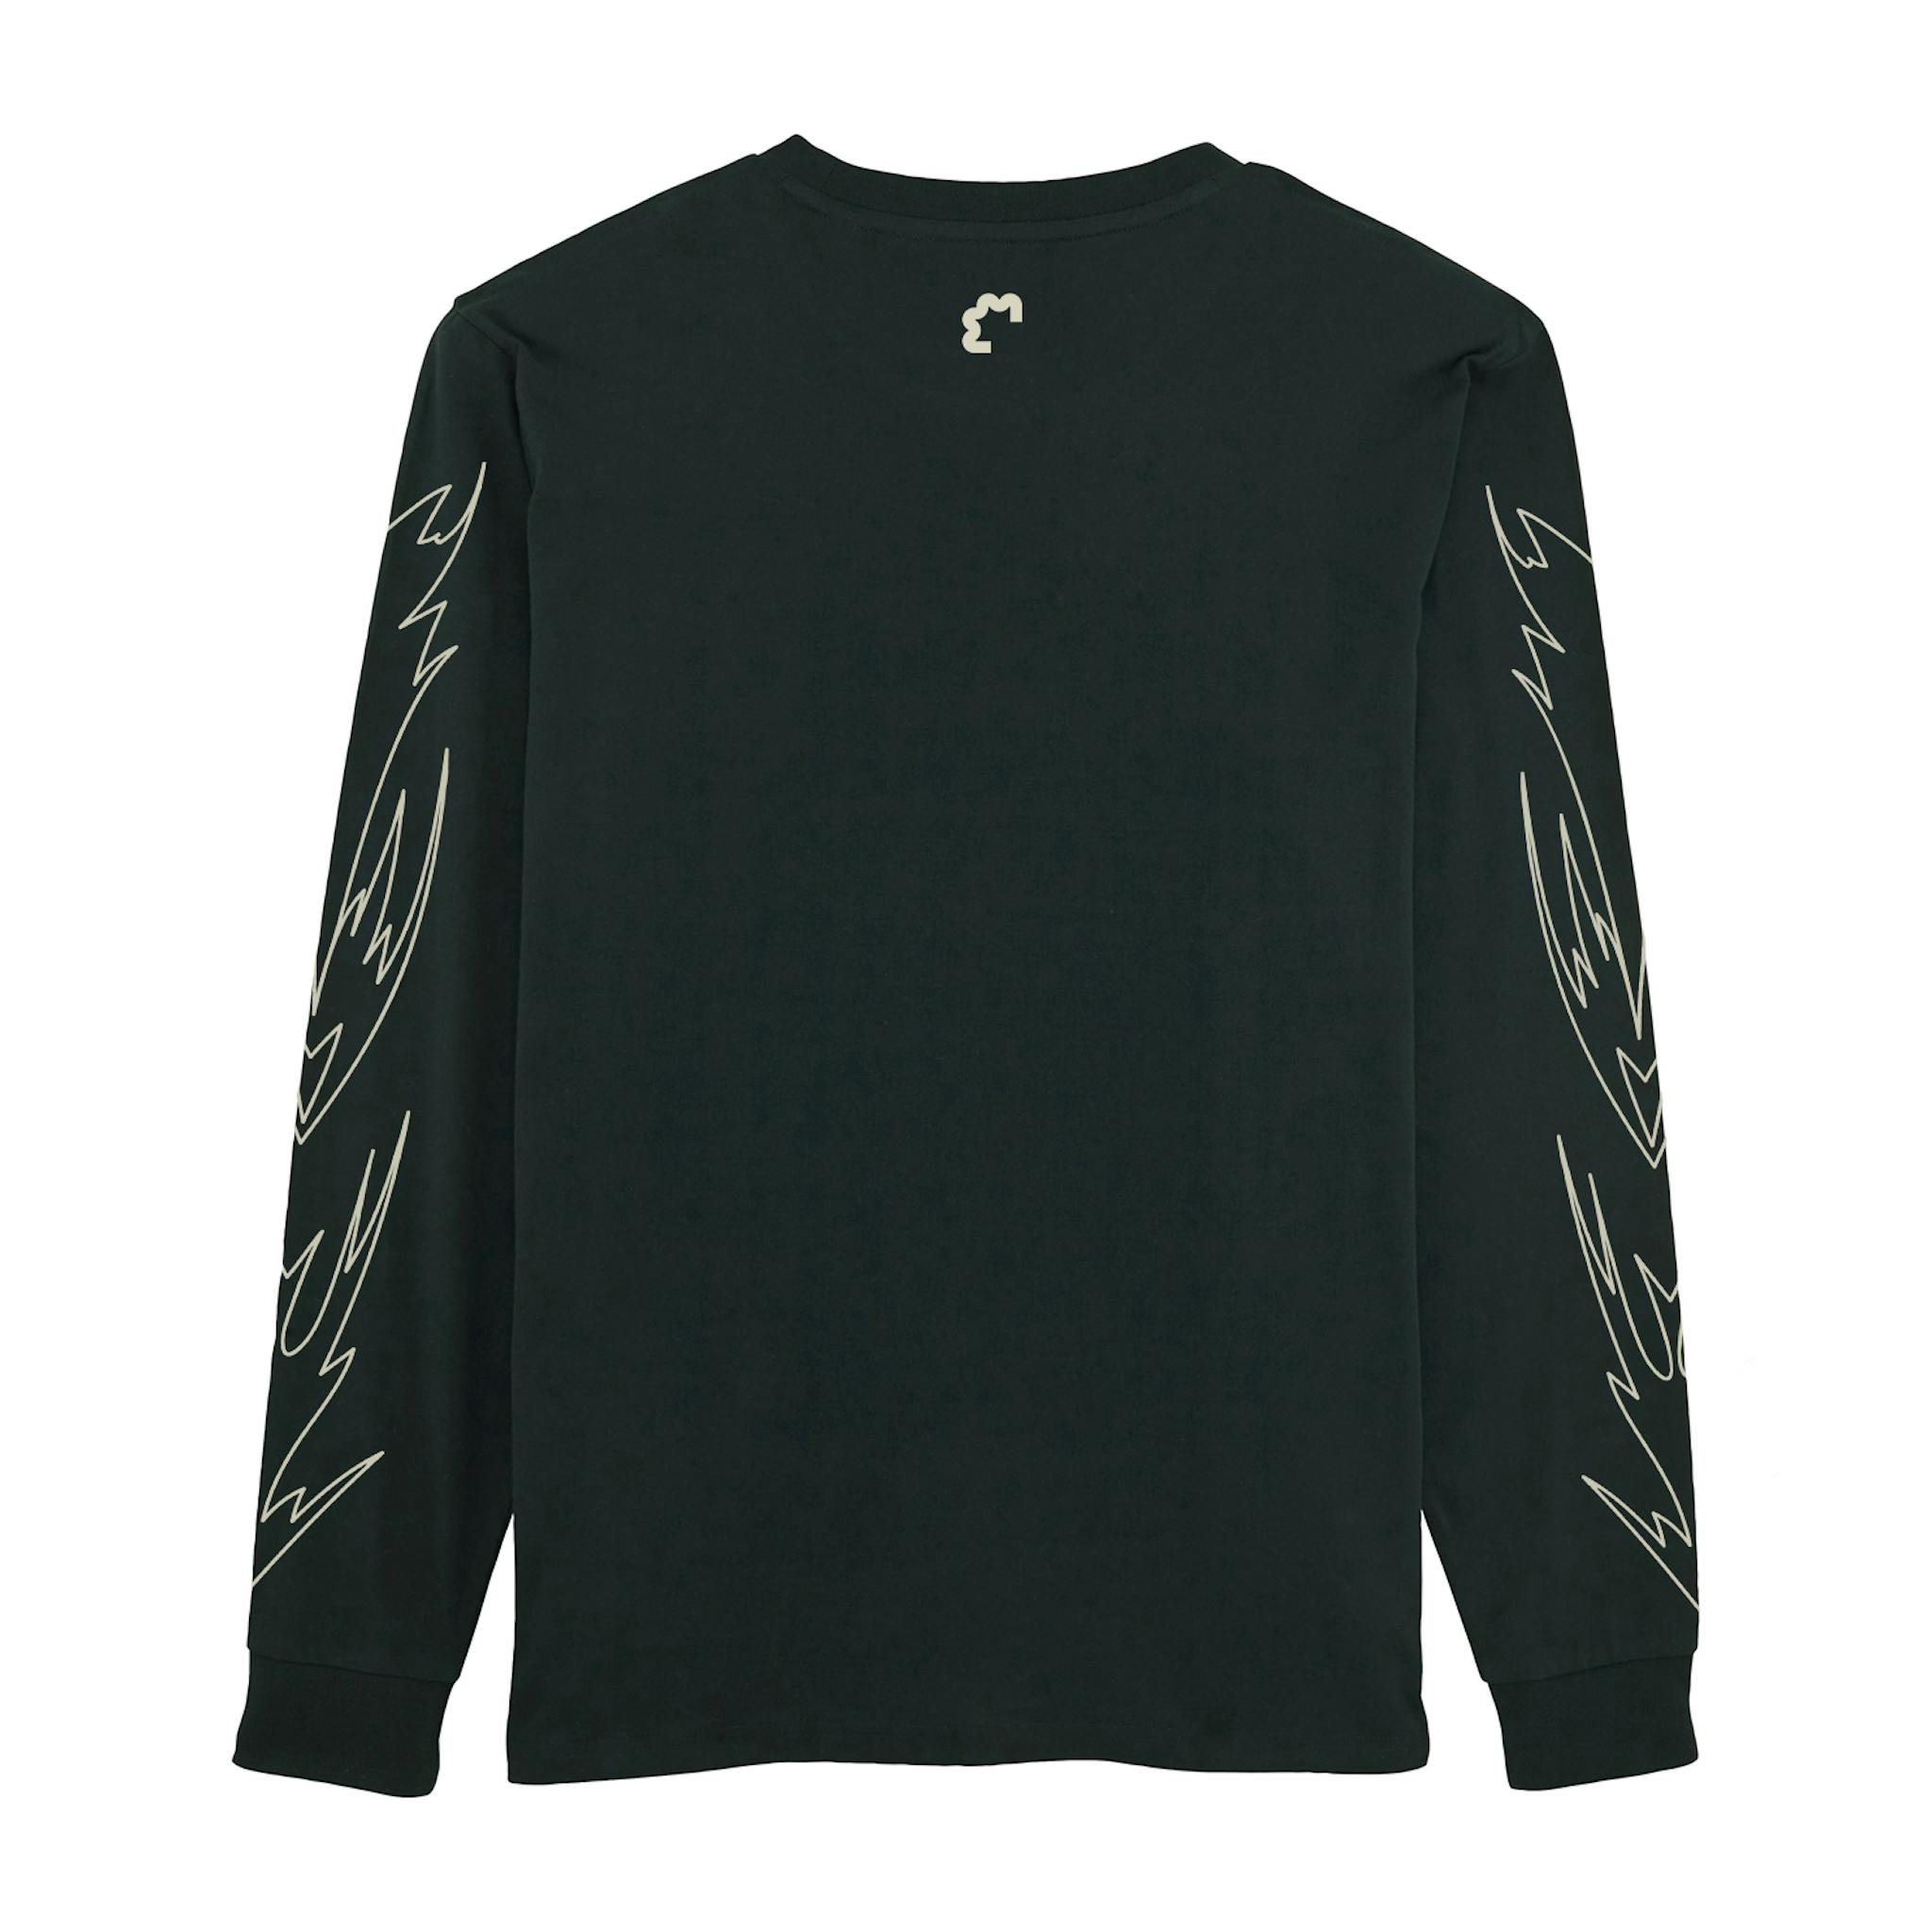 A black long-sleeve T-shirt with a small white logo on the upper back and lines down the sleeves.